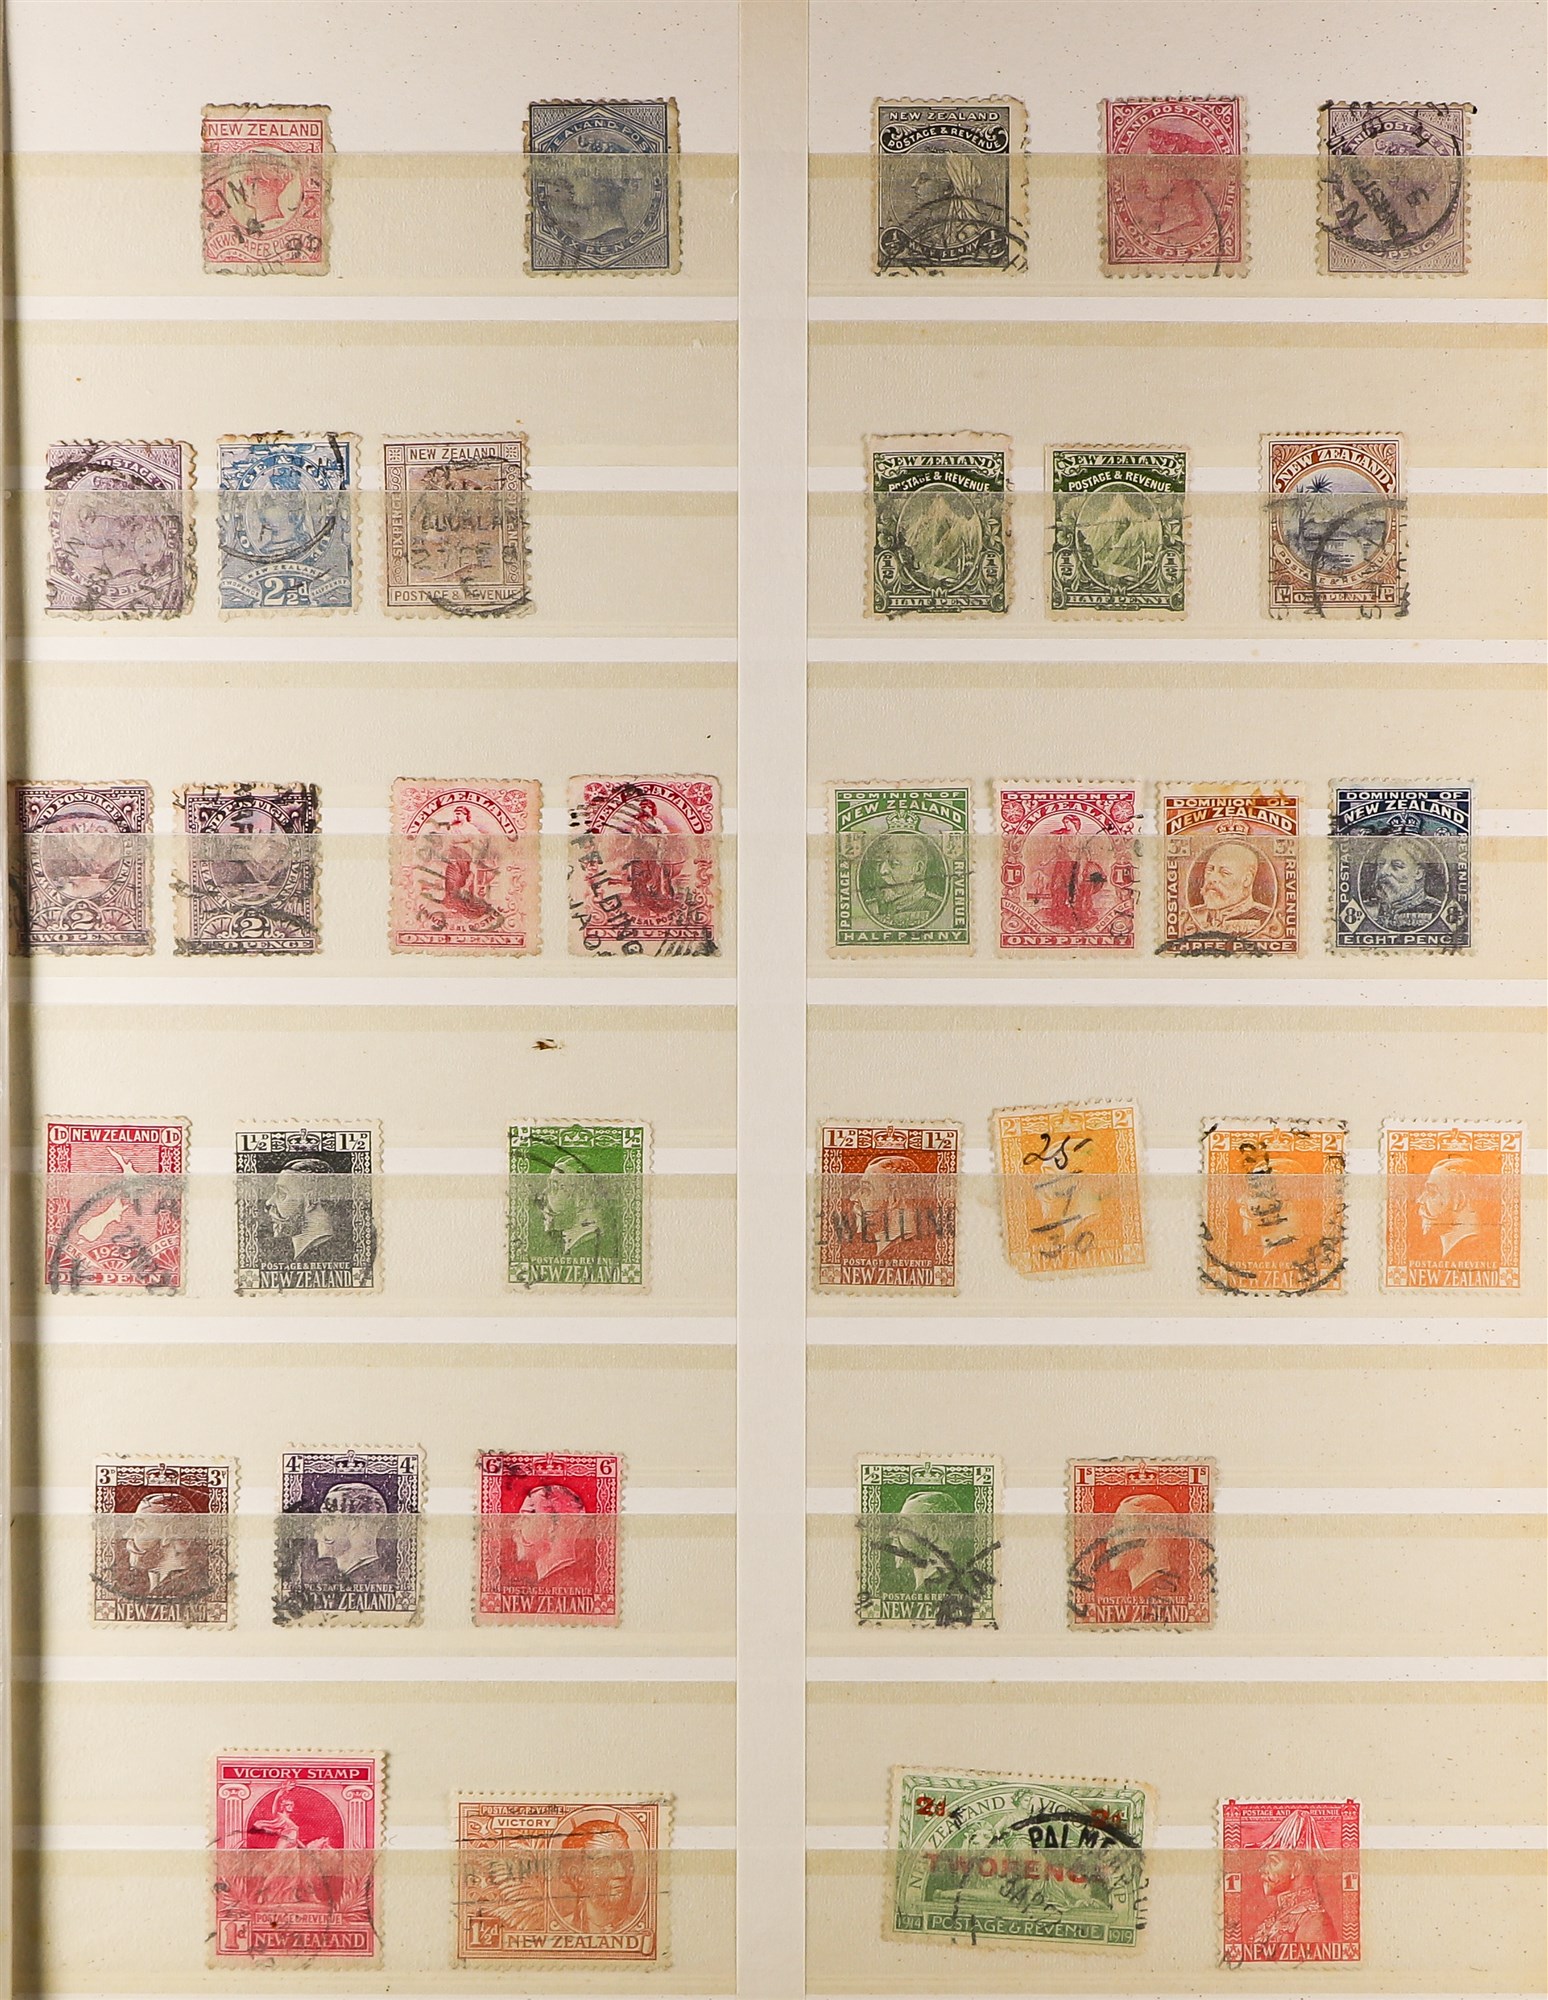 COLLECTIONS & ACCUMULATIONS 500+ STAMP ALBUMS. VAST ORIGINAL WORLD-WIDE ESTATE. From ledgers to ' - Image 20 of 55